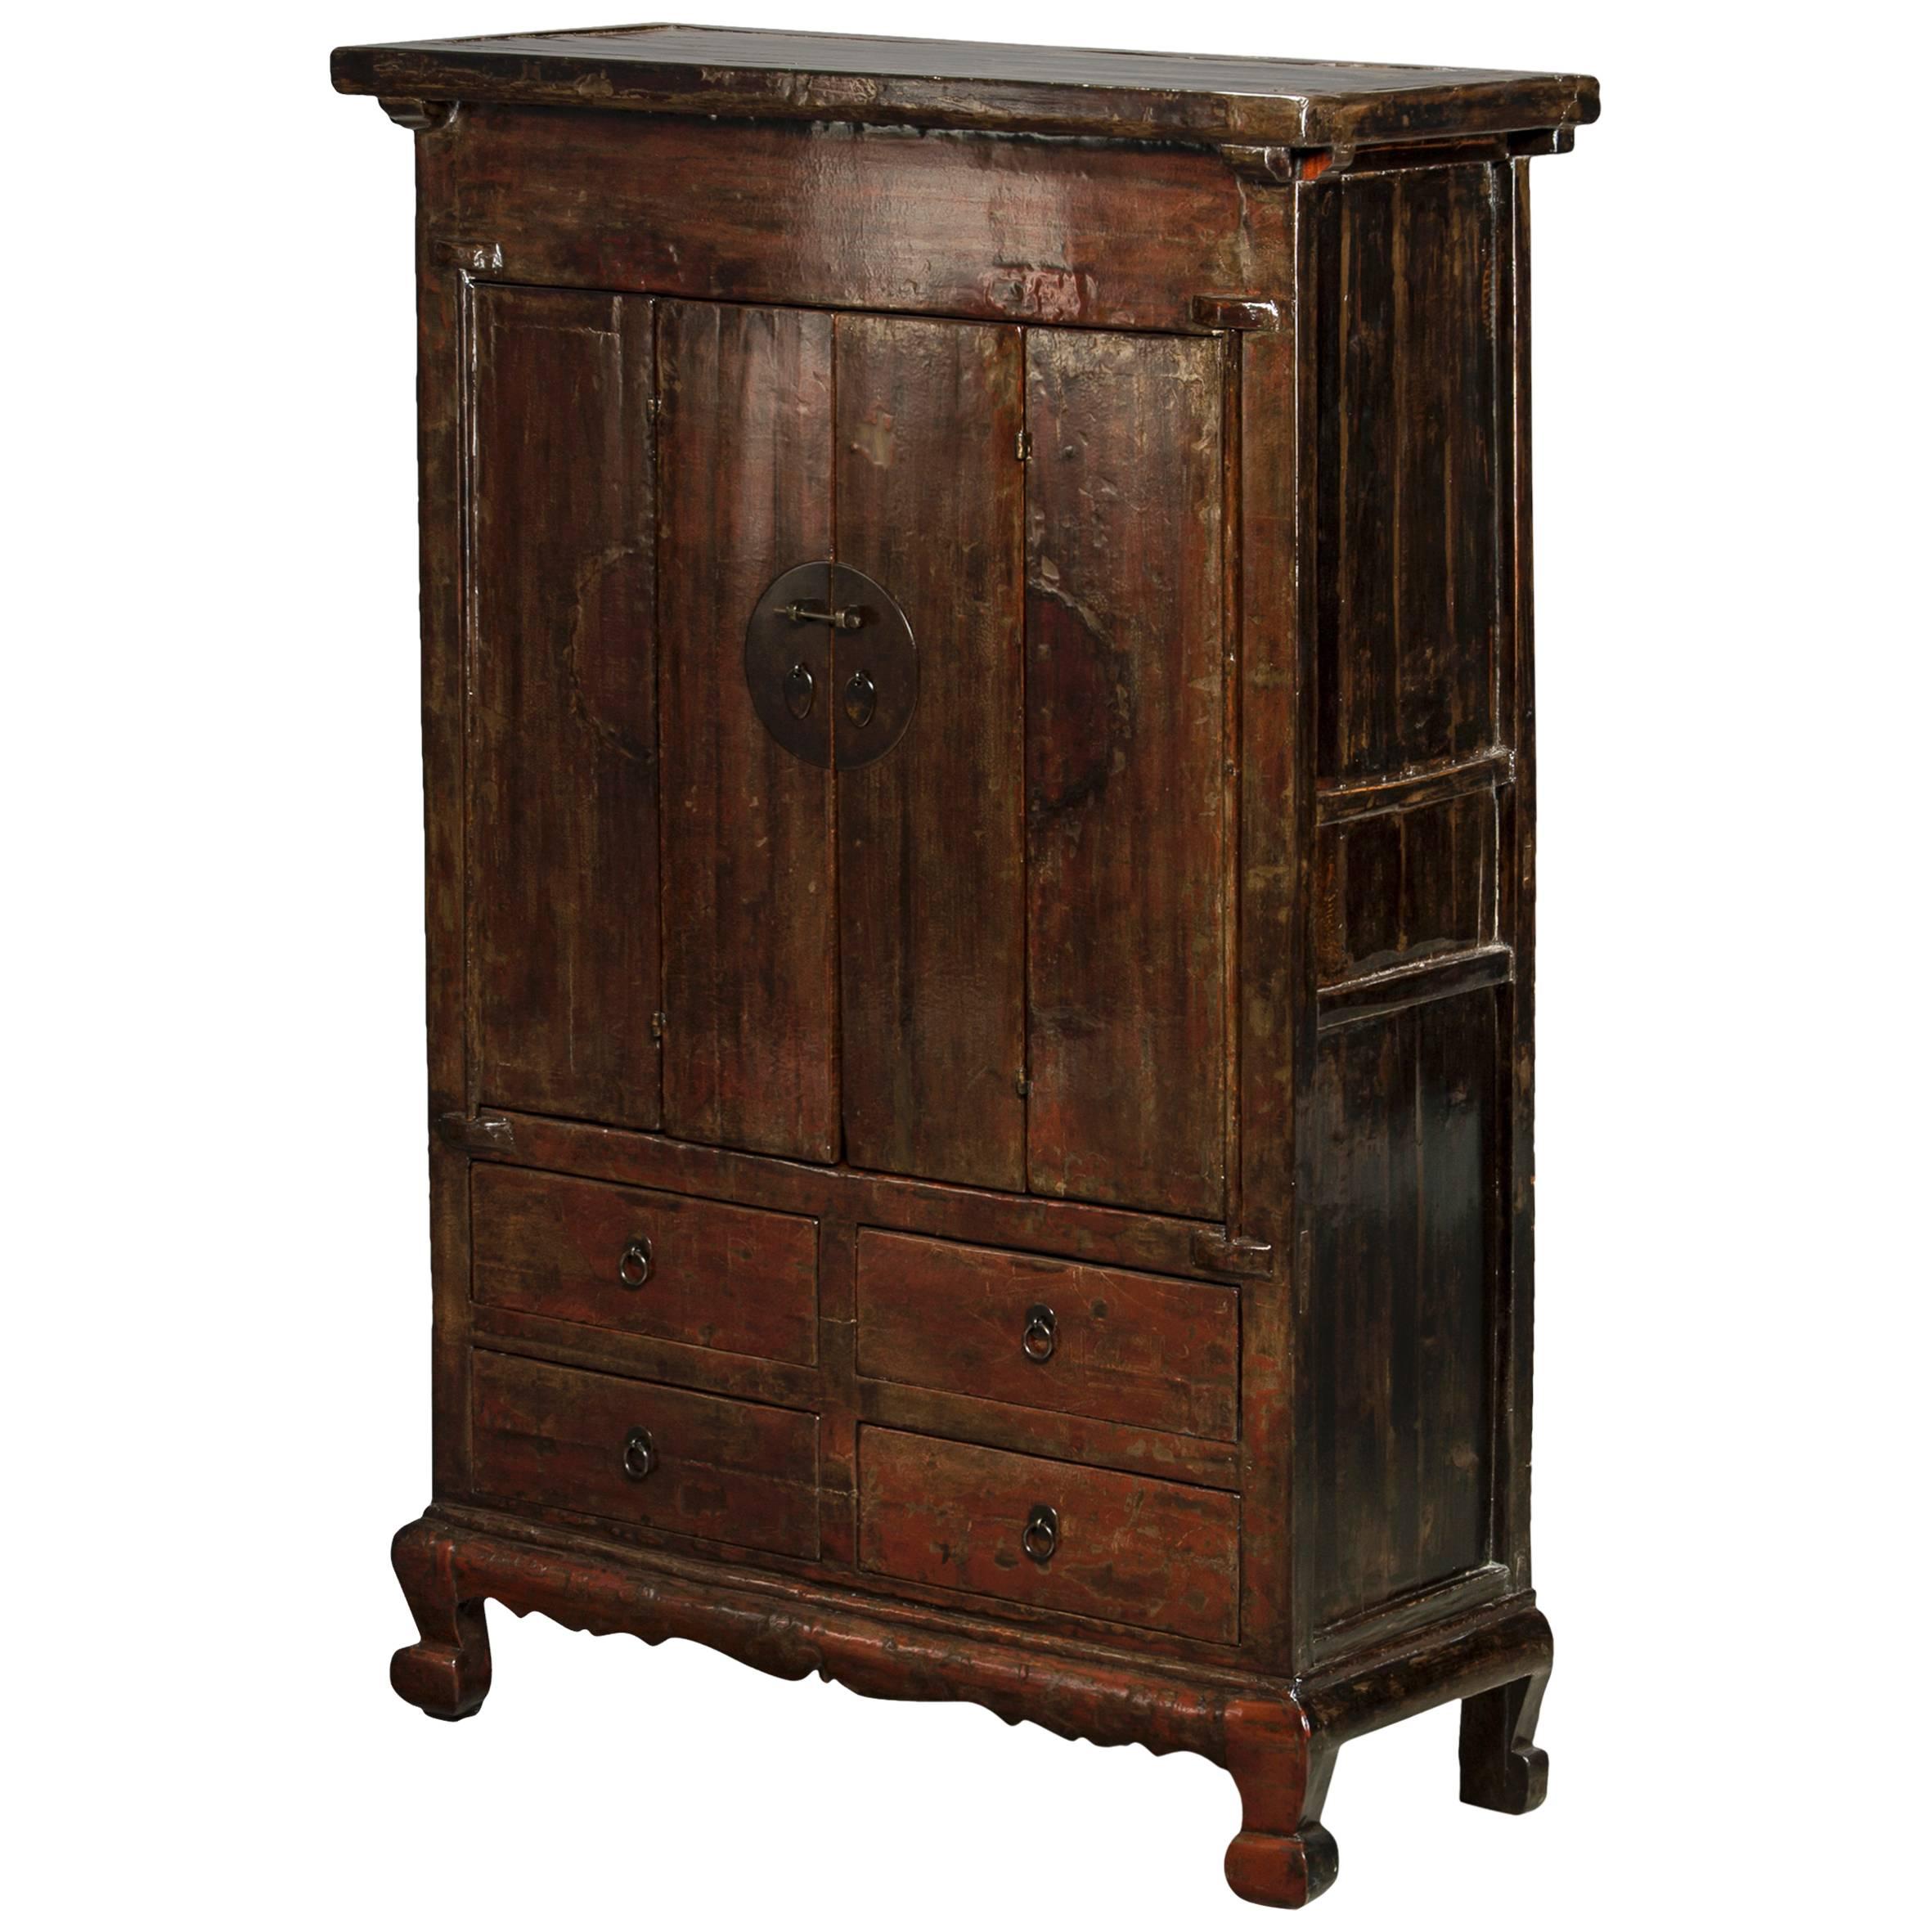 Cabinet from Shanxi, circa 1820